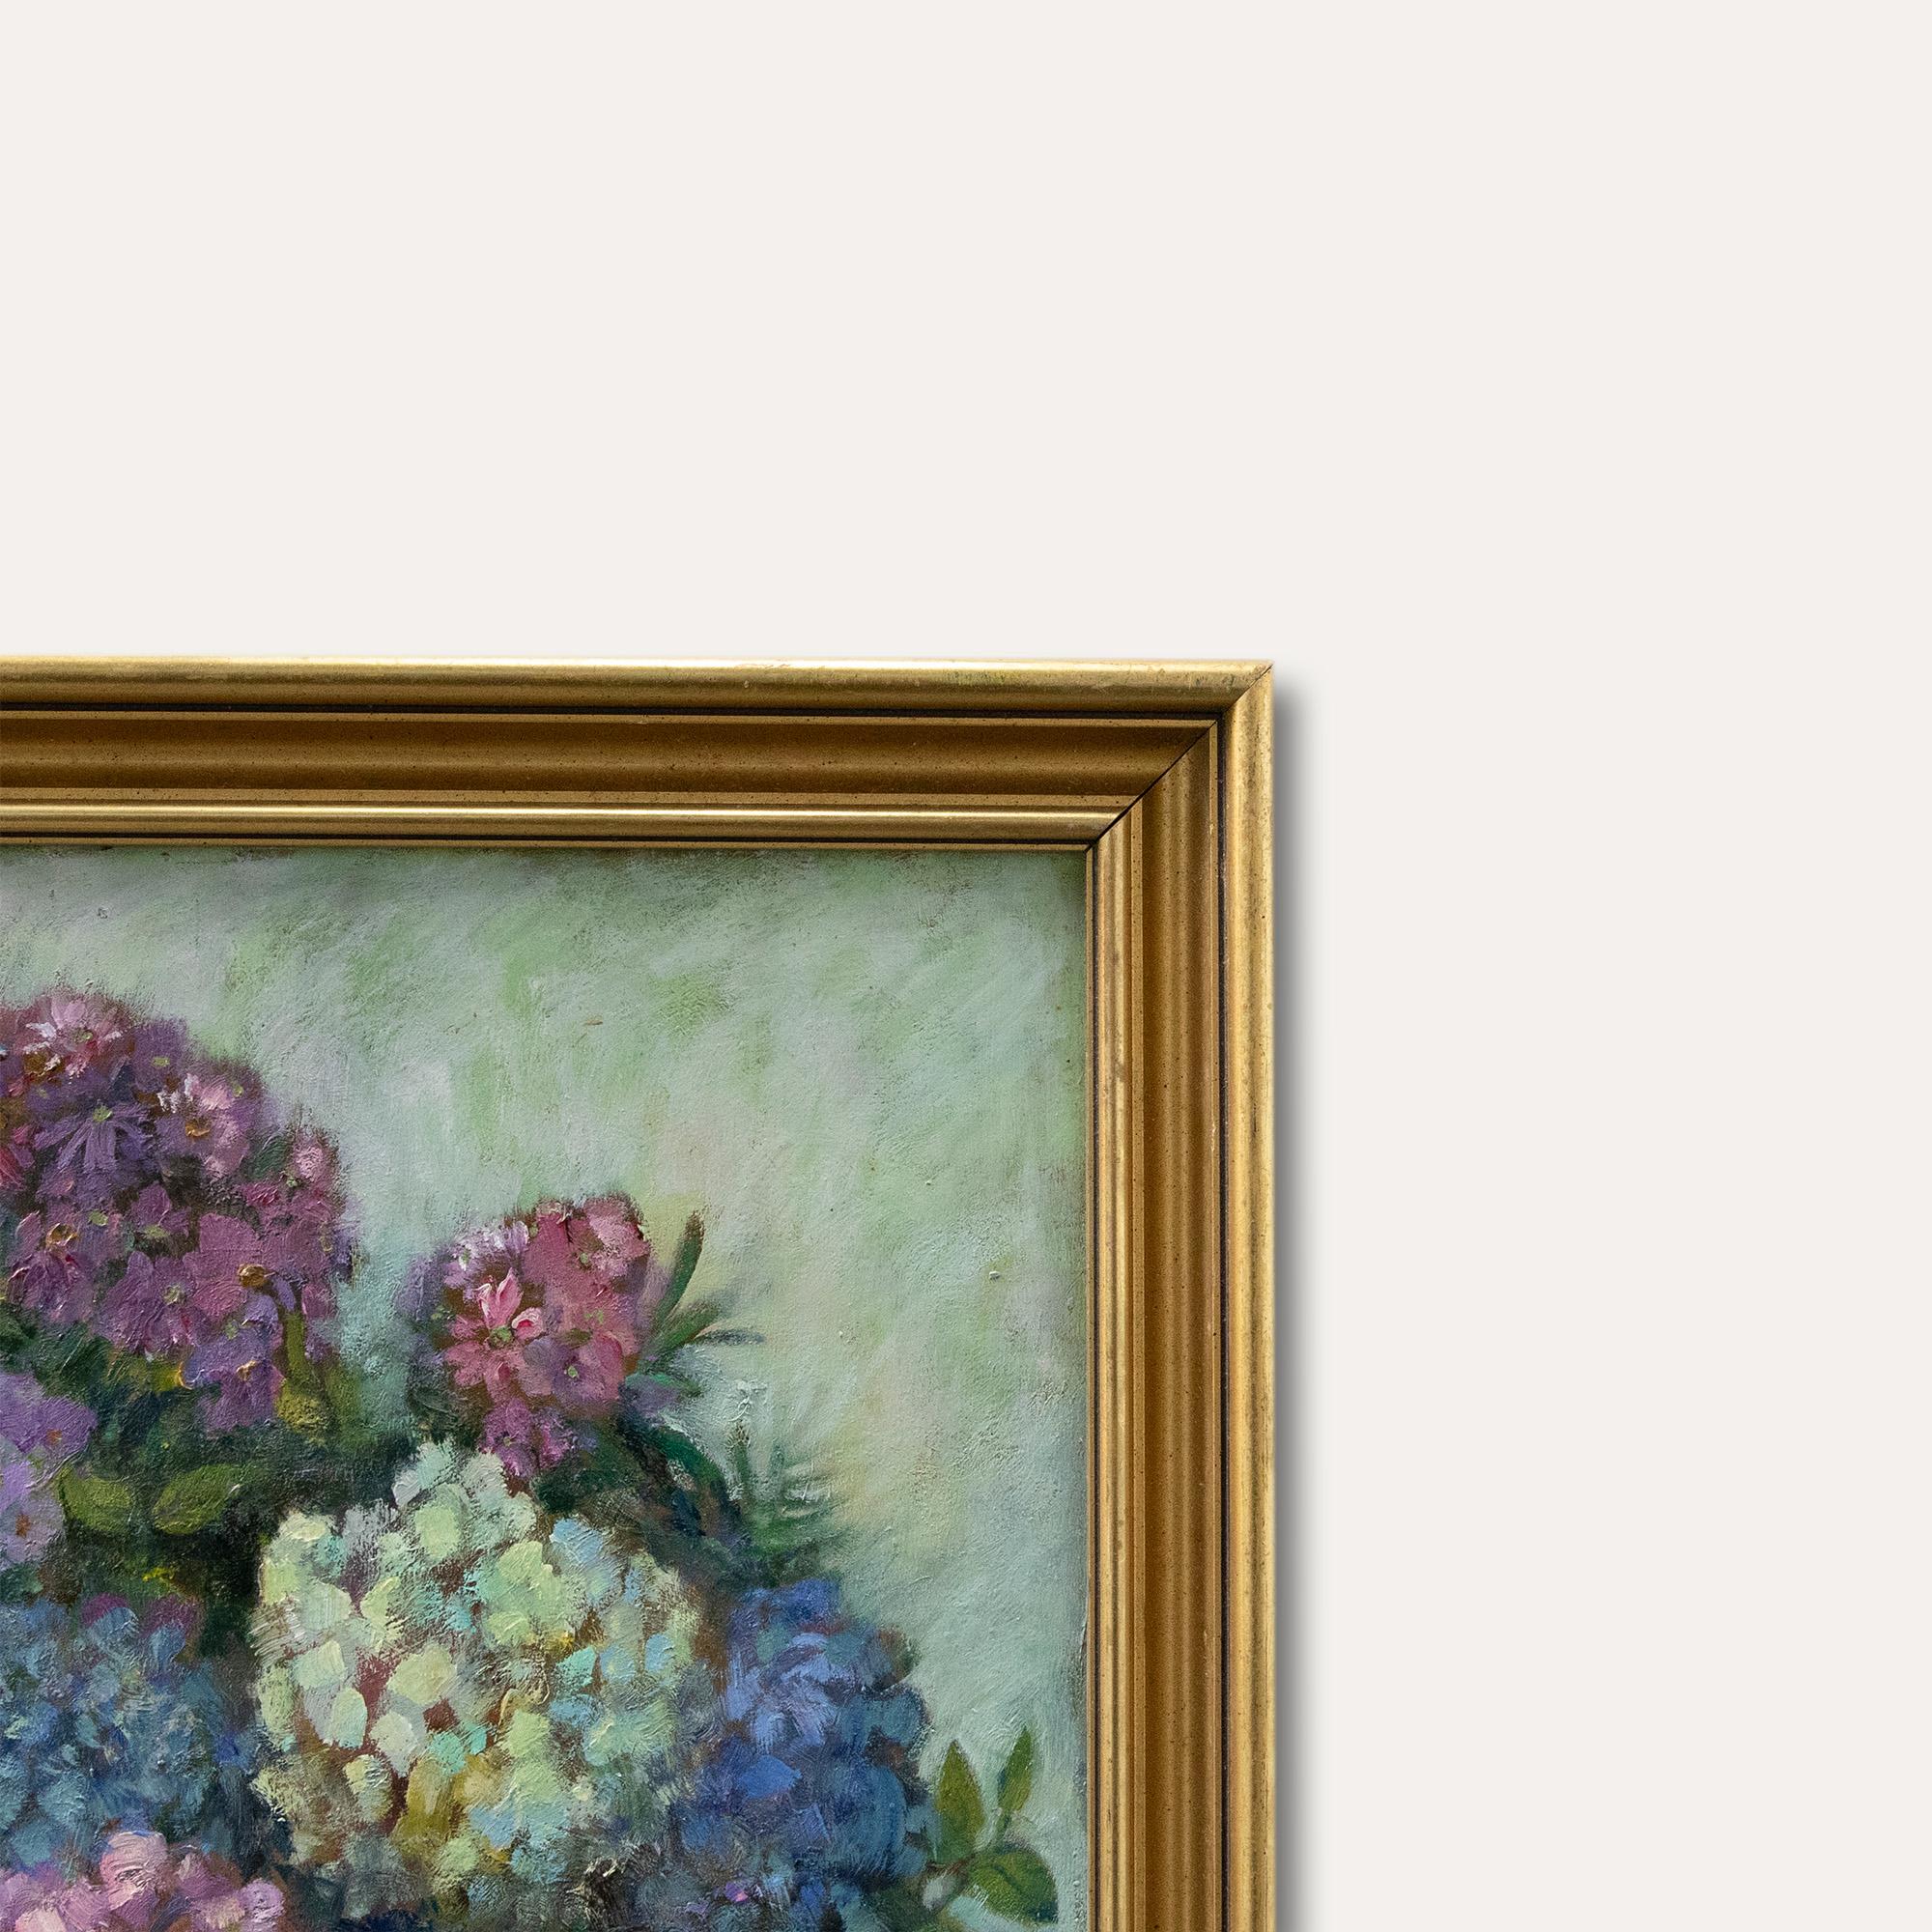 A charming oil study depicting a vibrant vas of pink, white and blue hydrangeas. Painted in an impressionist style, the artist uses gestural brush strokes to capture a sense of movement in the still life study. Signed to the lower right. Presented